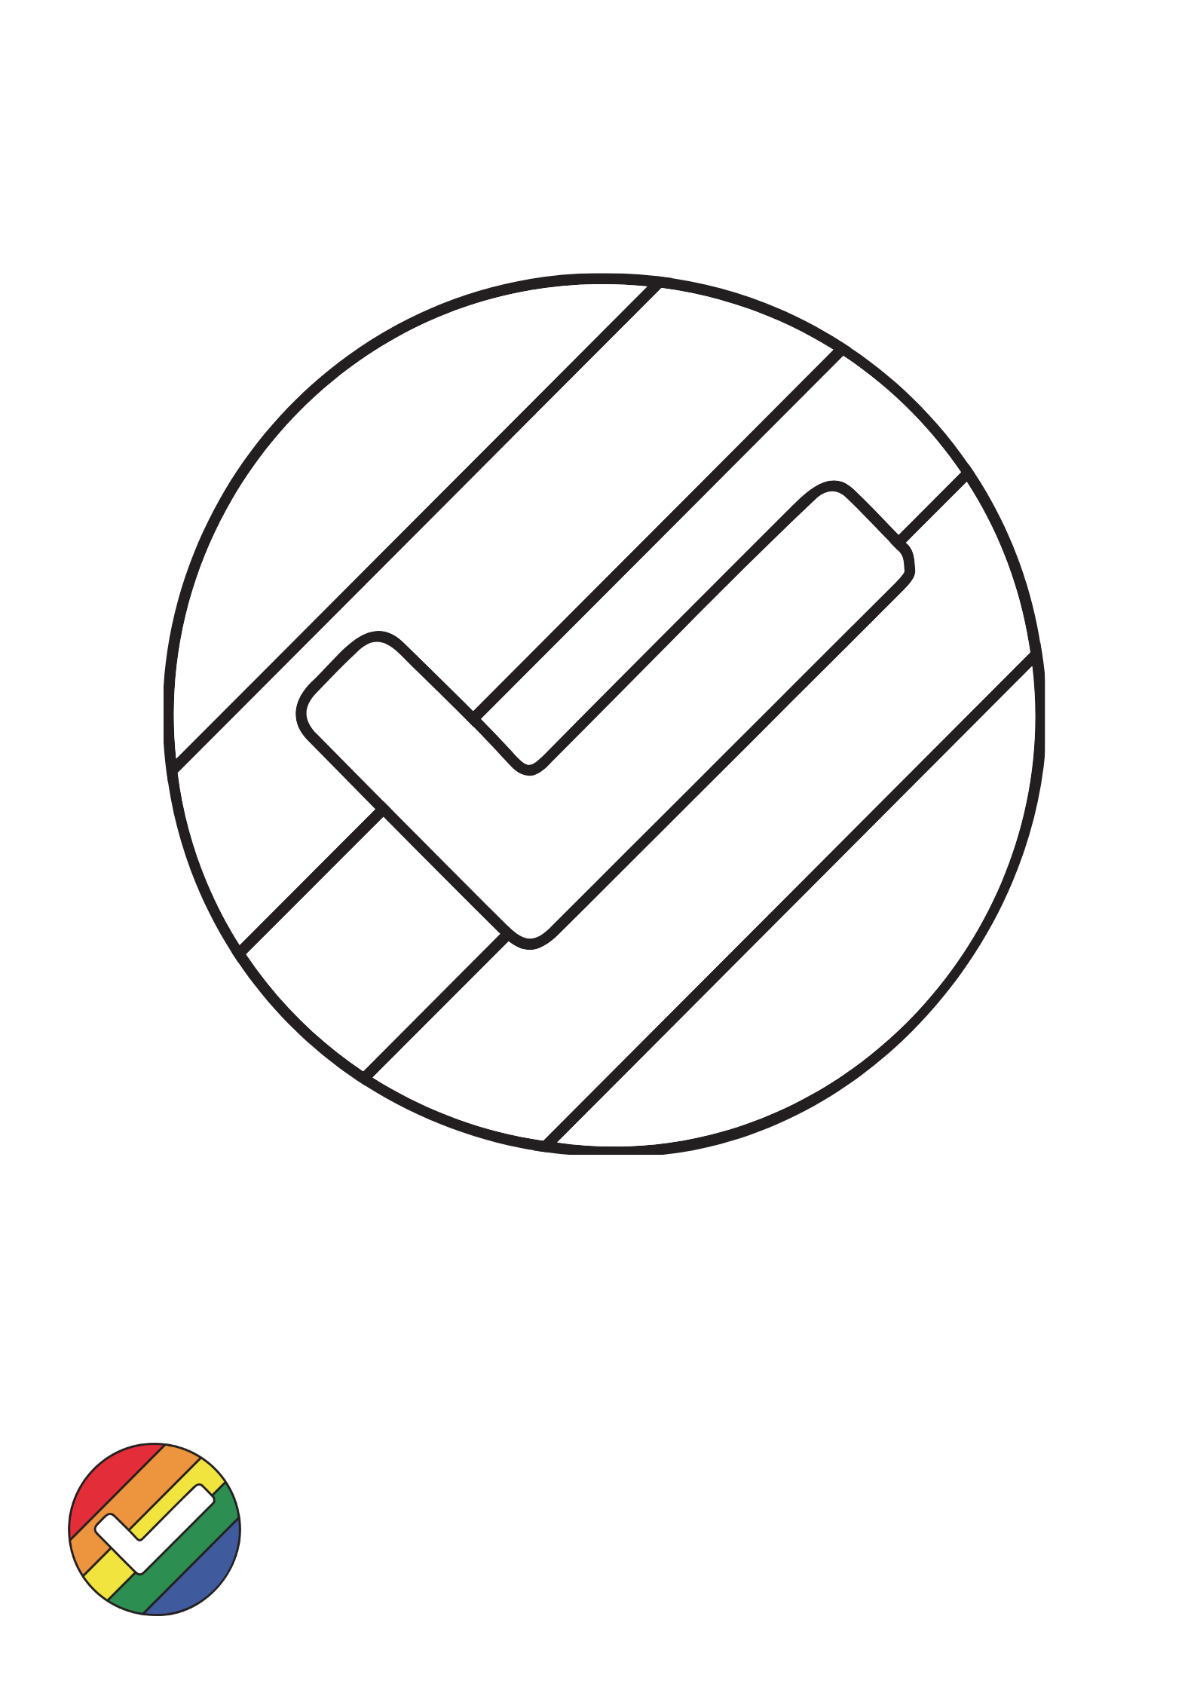 Free Rainbow Check Mark coloring page Template